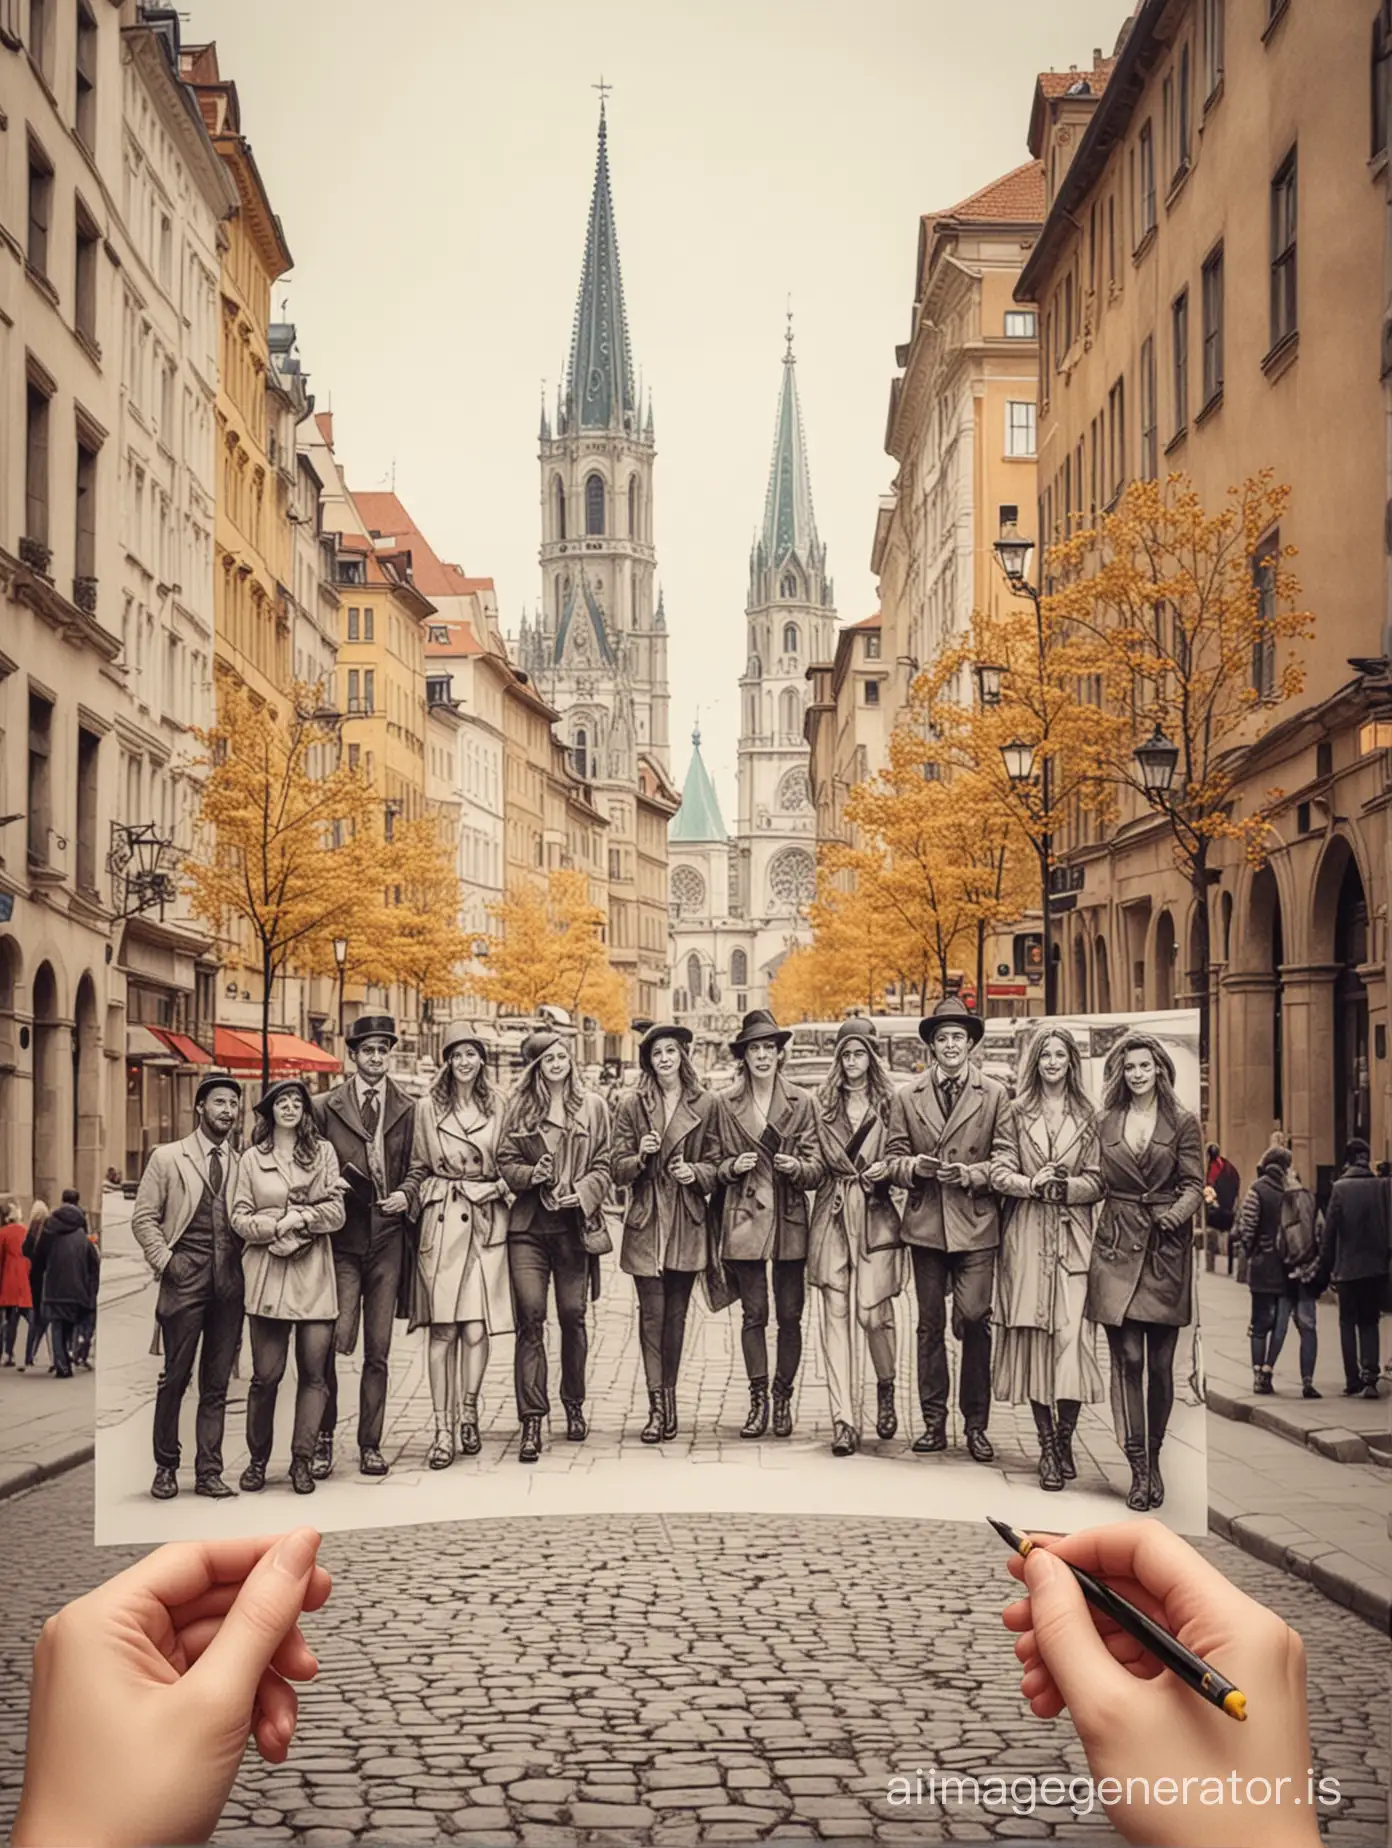 merry company in a beautiful city turn photo into drawing